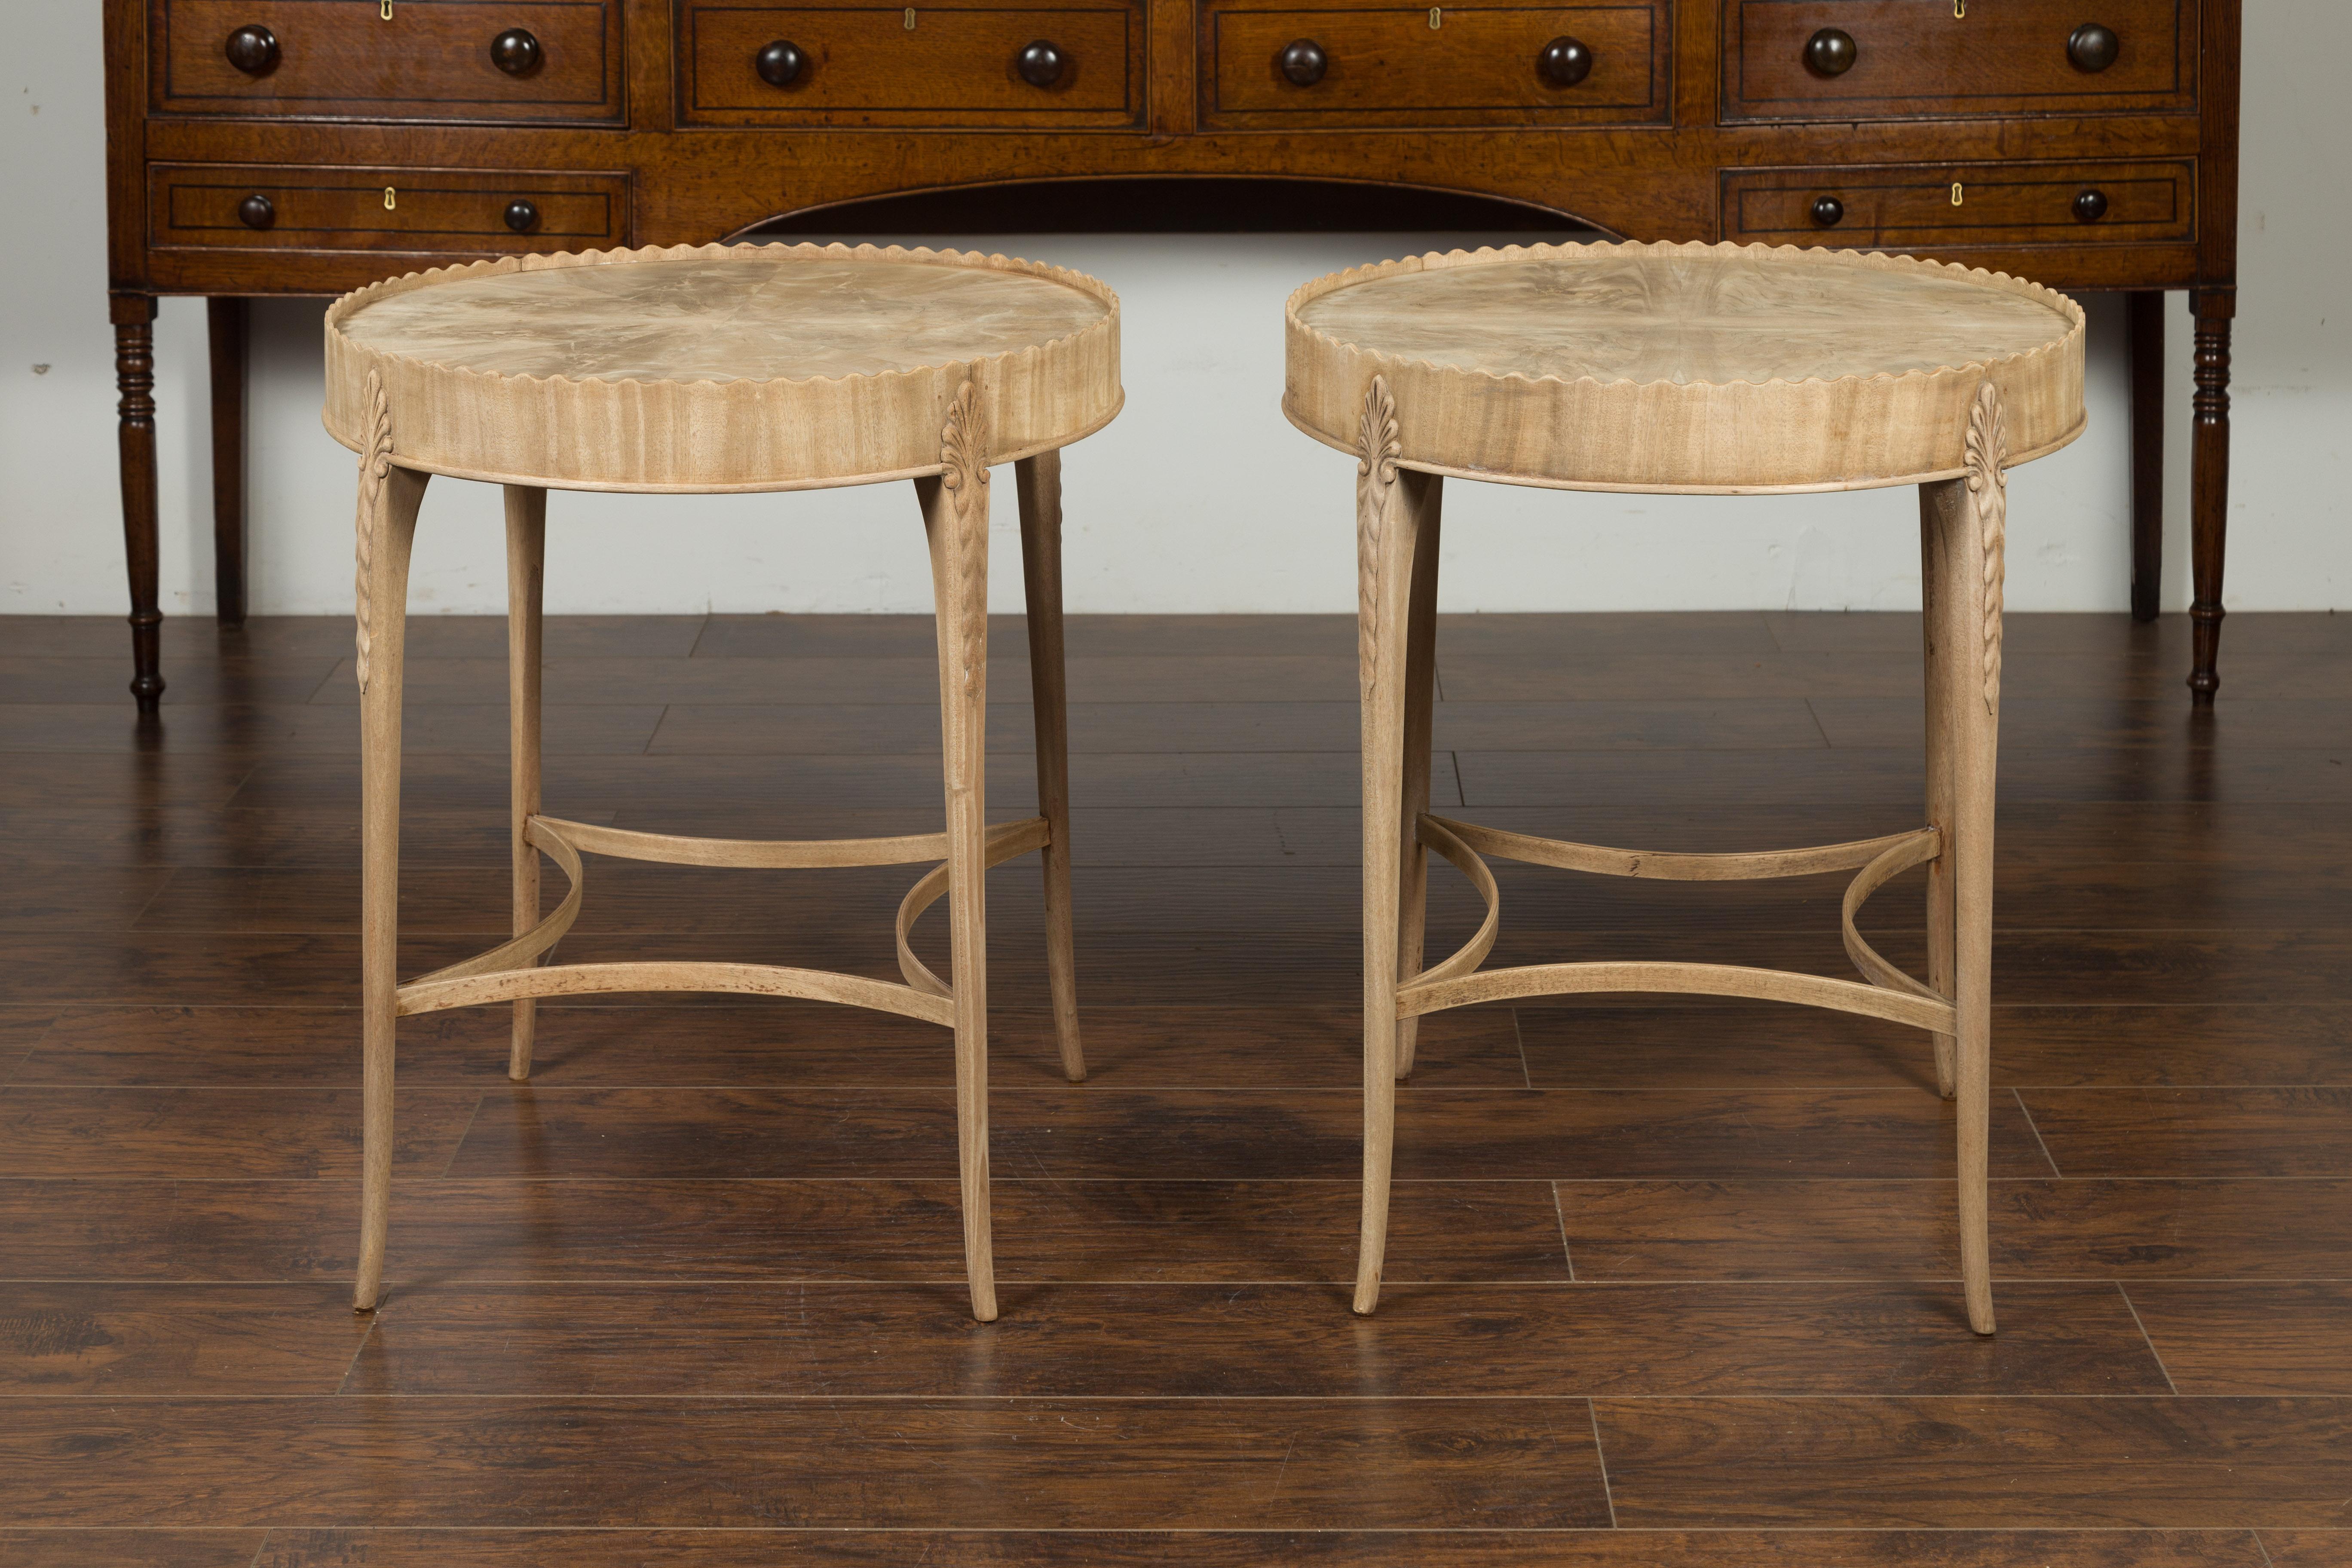 Pair of English Midcentury Bleached Mahogany Side Tables with Circular Tops 8